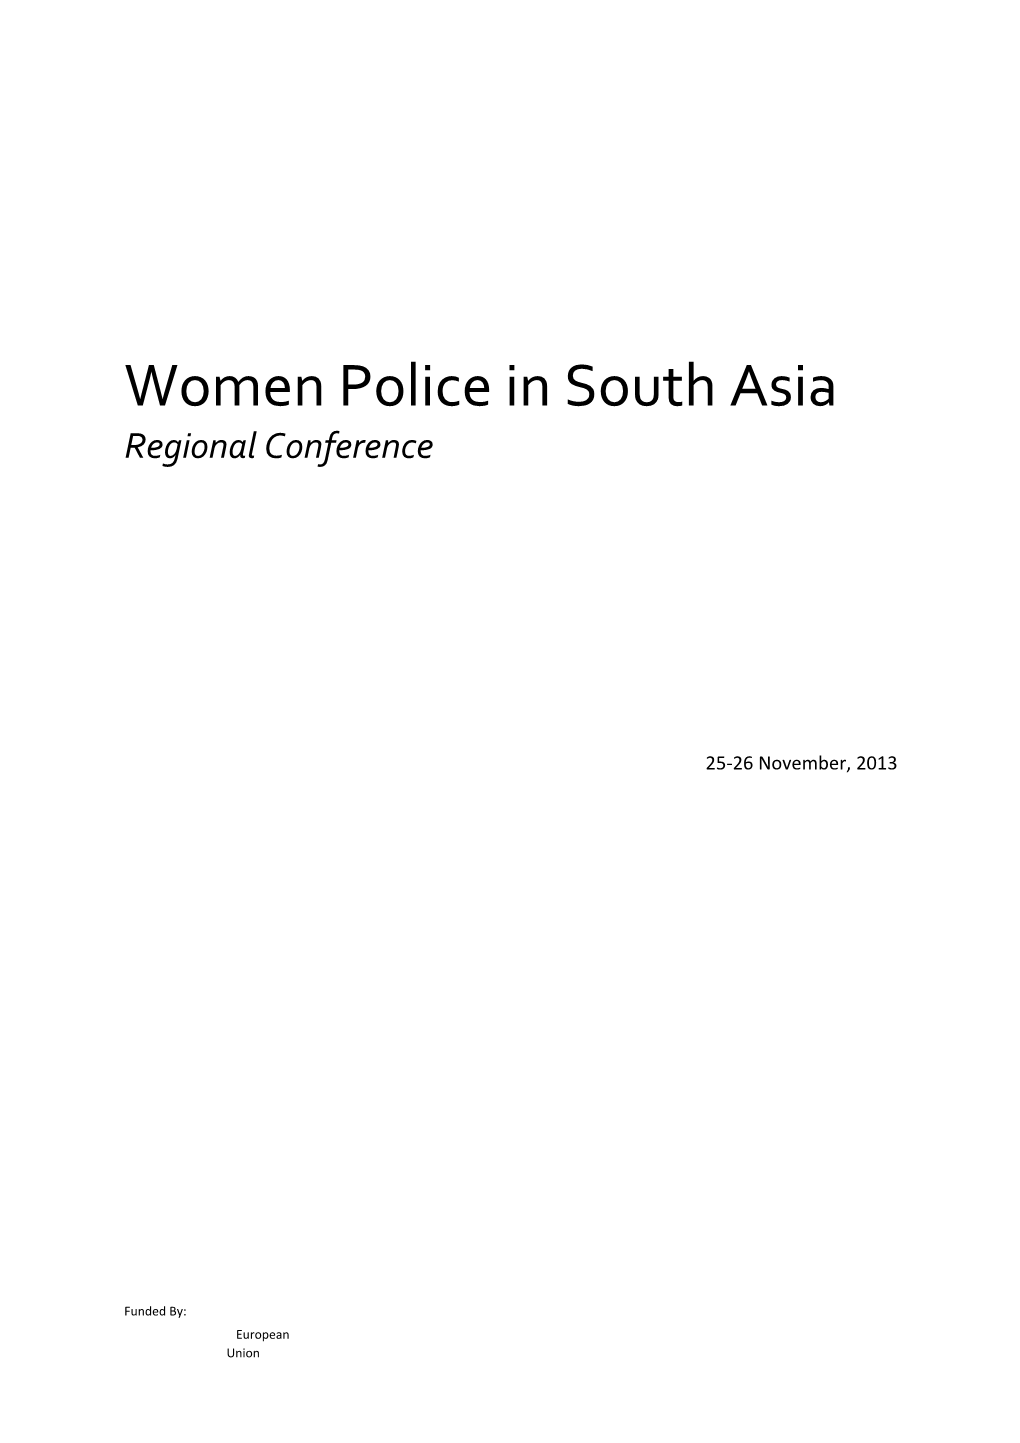 Women Police in South Asia